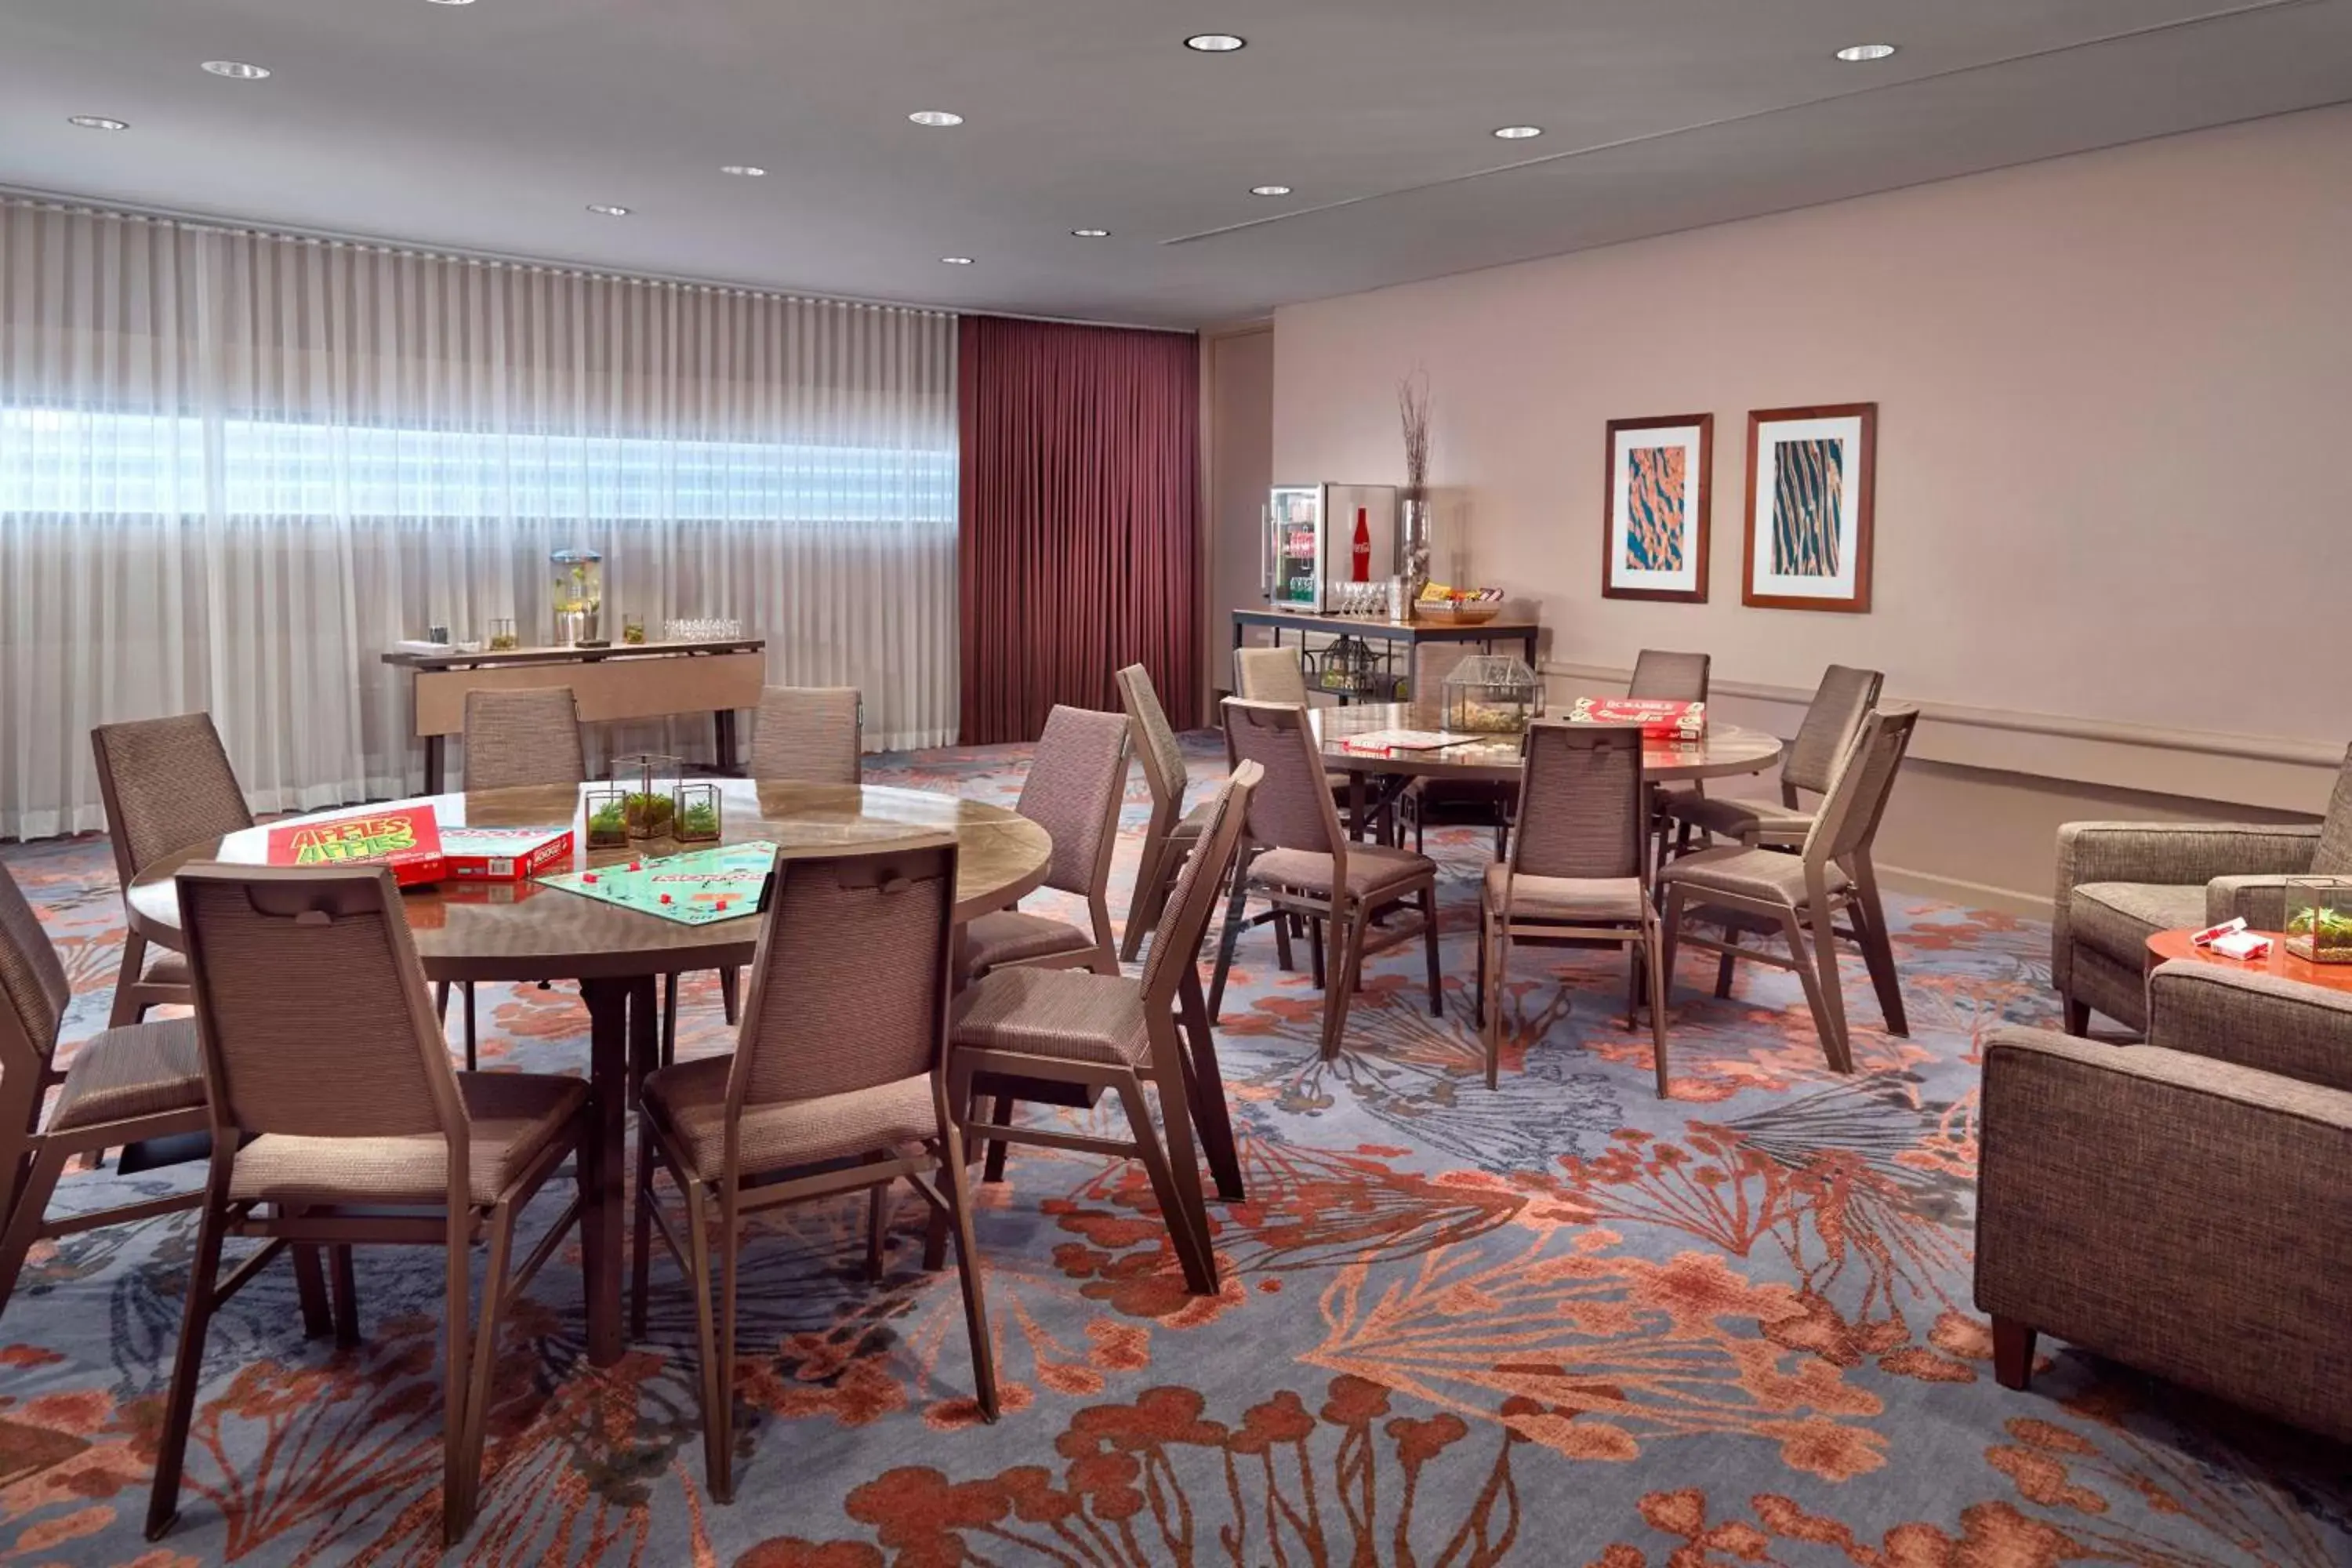 Meeting/conference room, Restaurant/Places to Eat in The Westin Peachtree Plaza, Atlanta